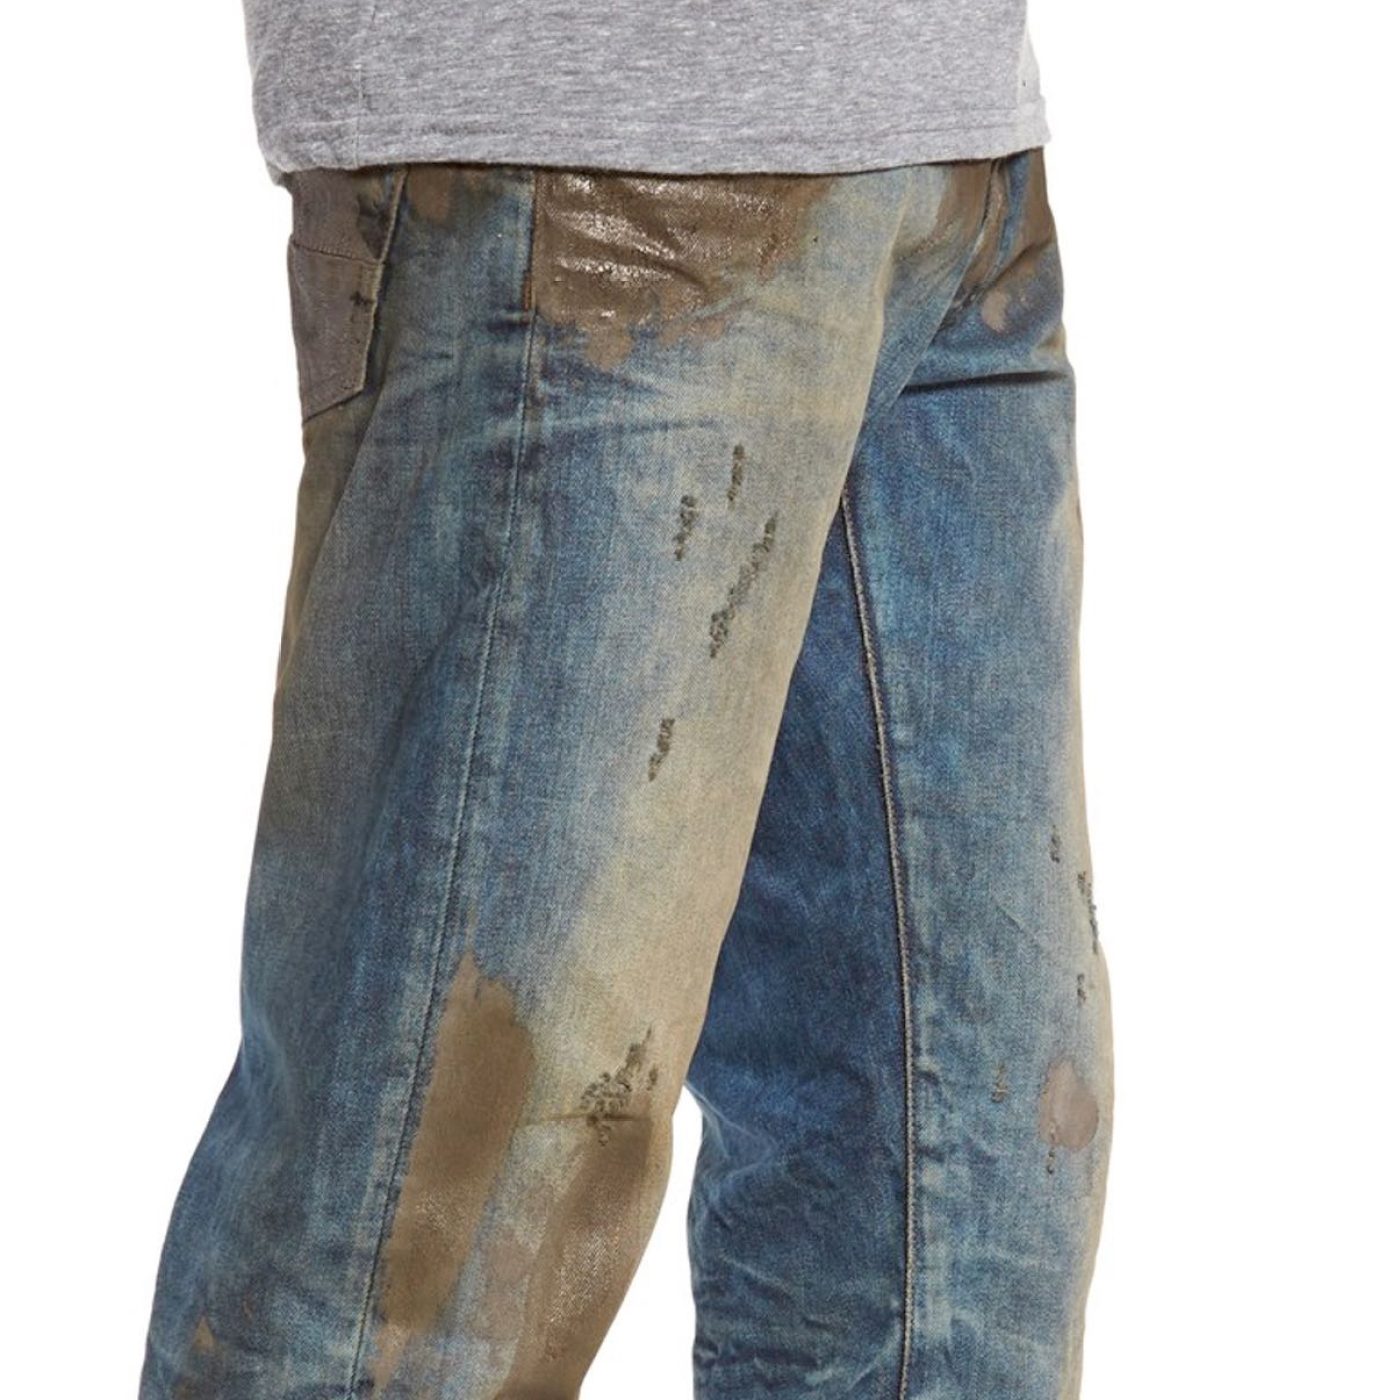 You're not a real man unless you buy $425 jeans with mud already on them